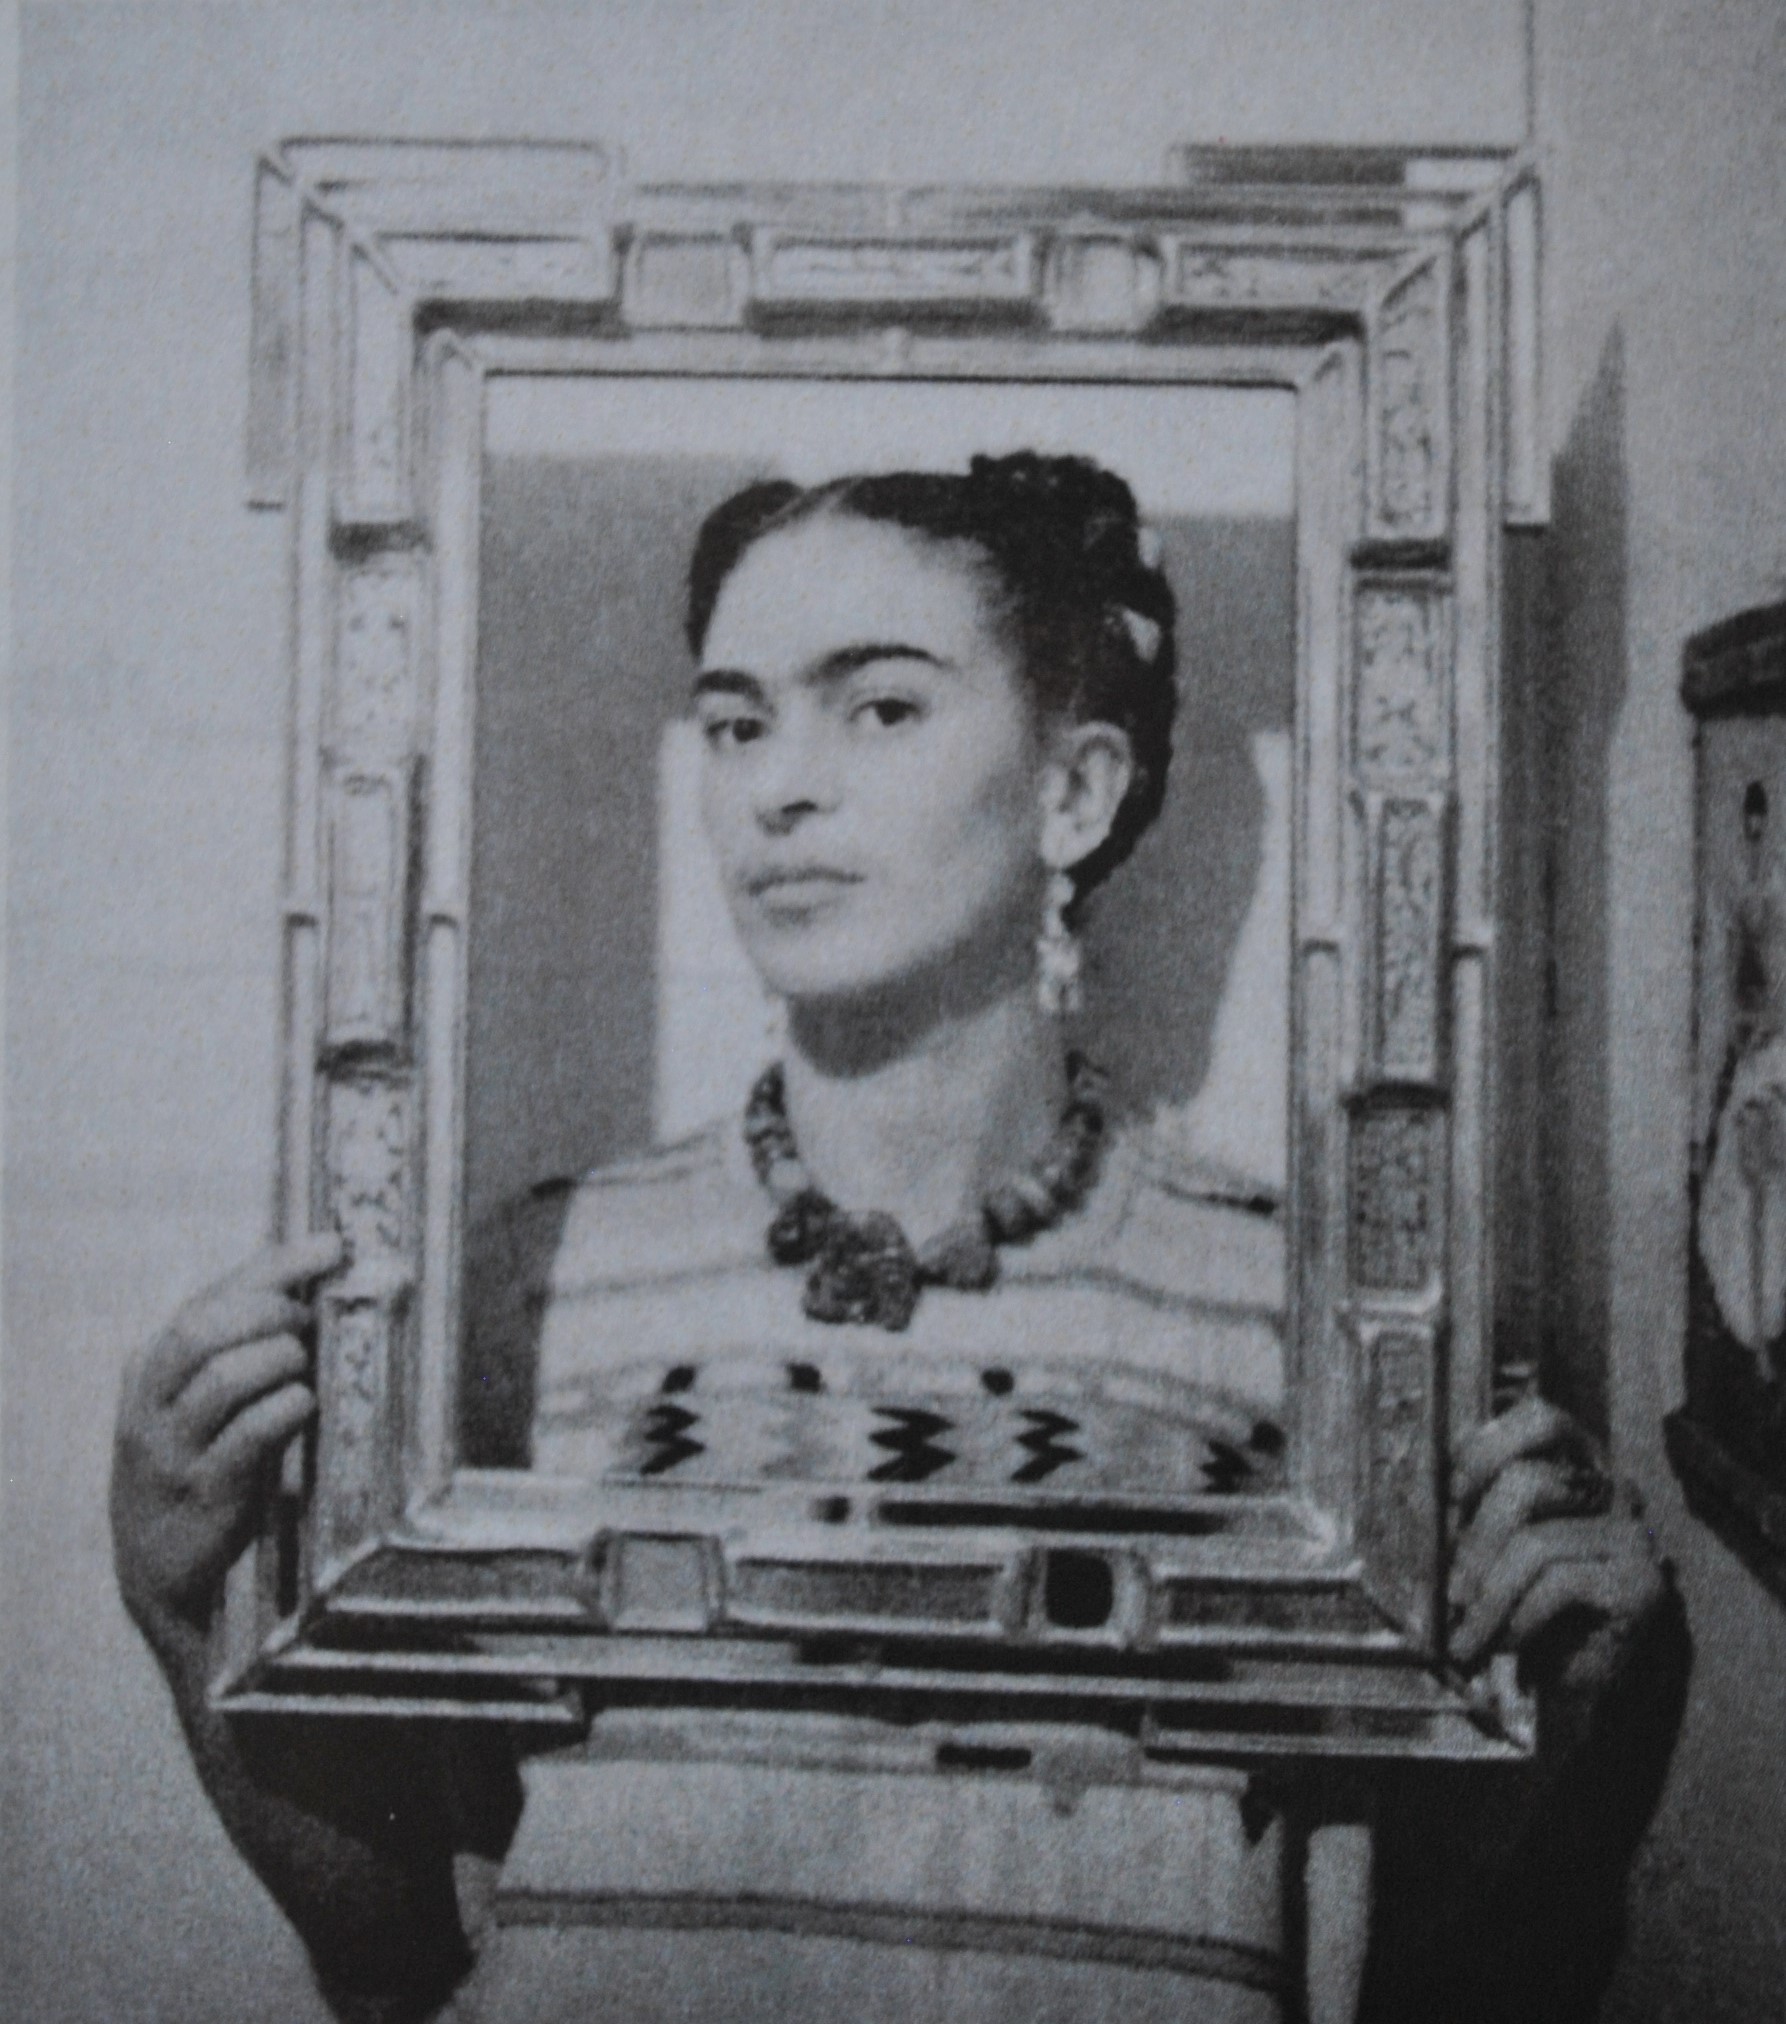 Photographic portrait of Frida Kahlo within a picture frame